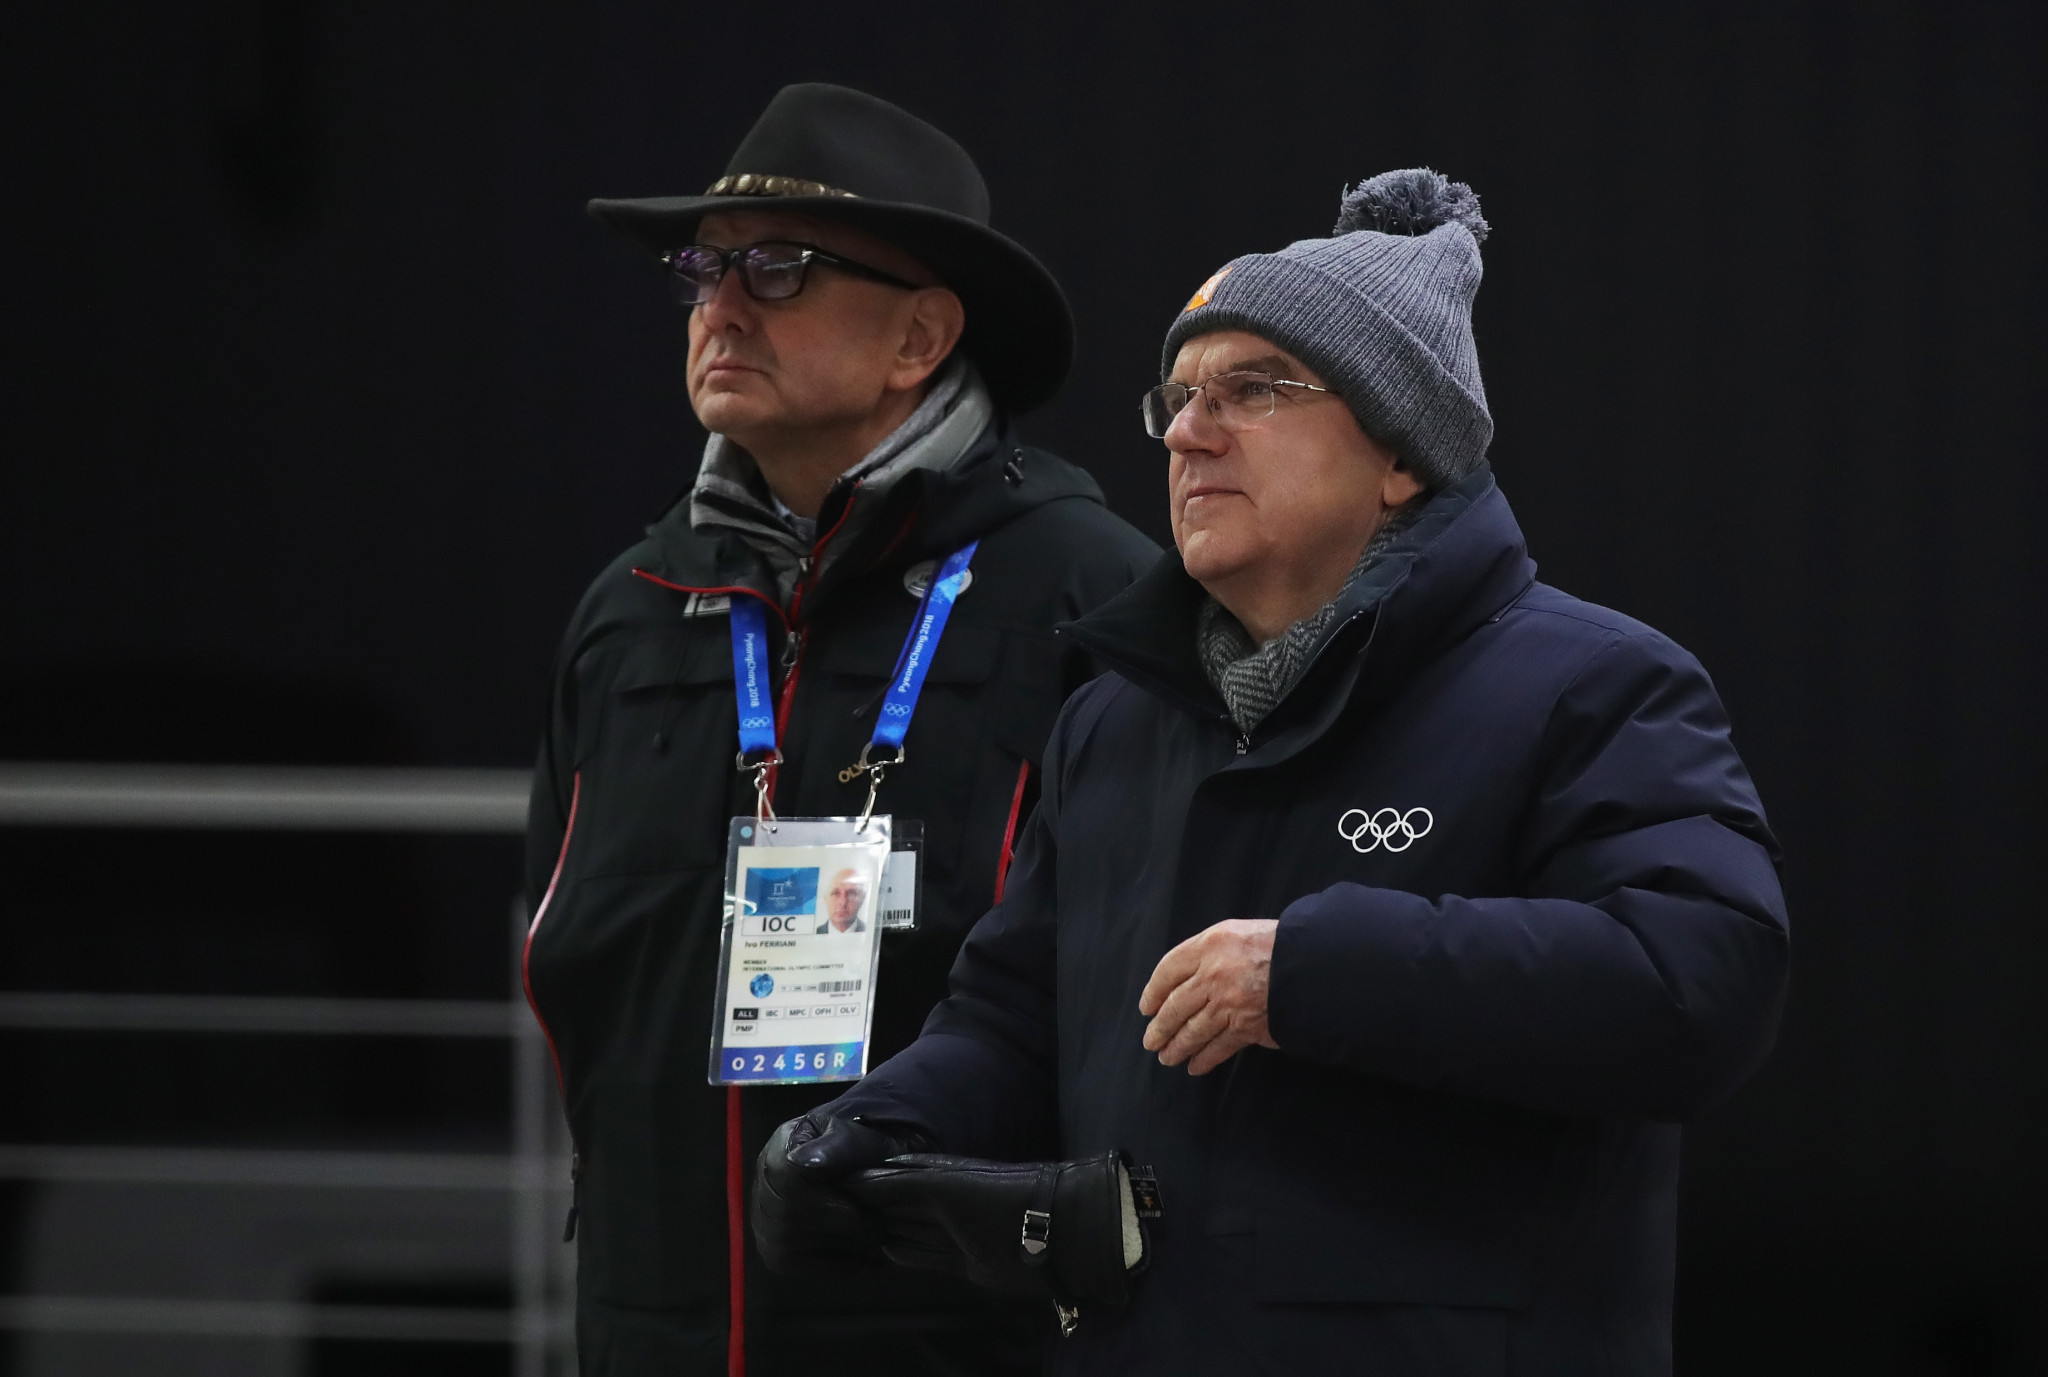 Ivo Ferriani, left, pictured alongside IOC President Thomas Bach ©Getty Images